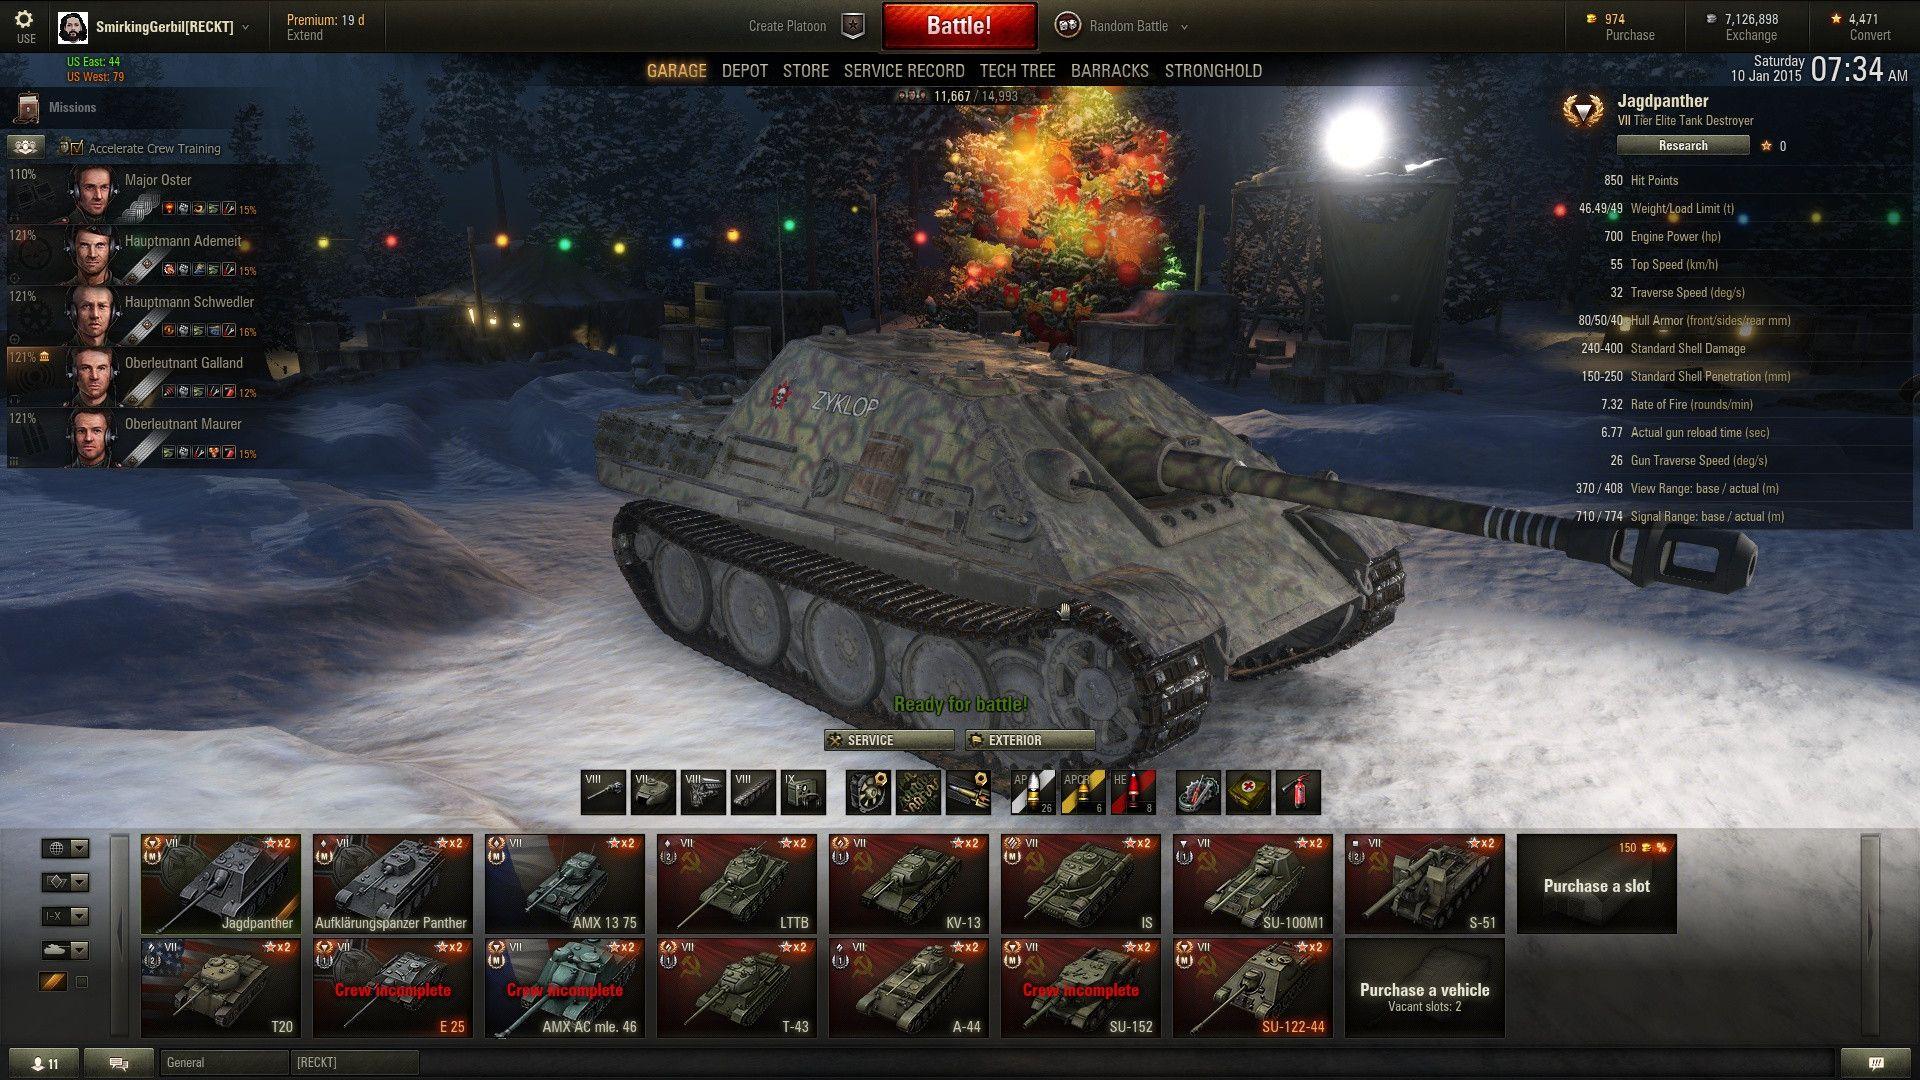 JagdPanther is why I started this game Destroyers